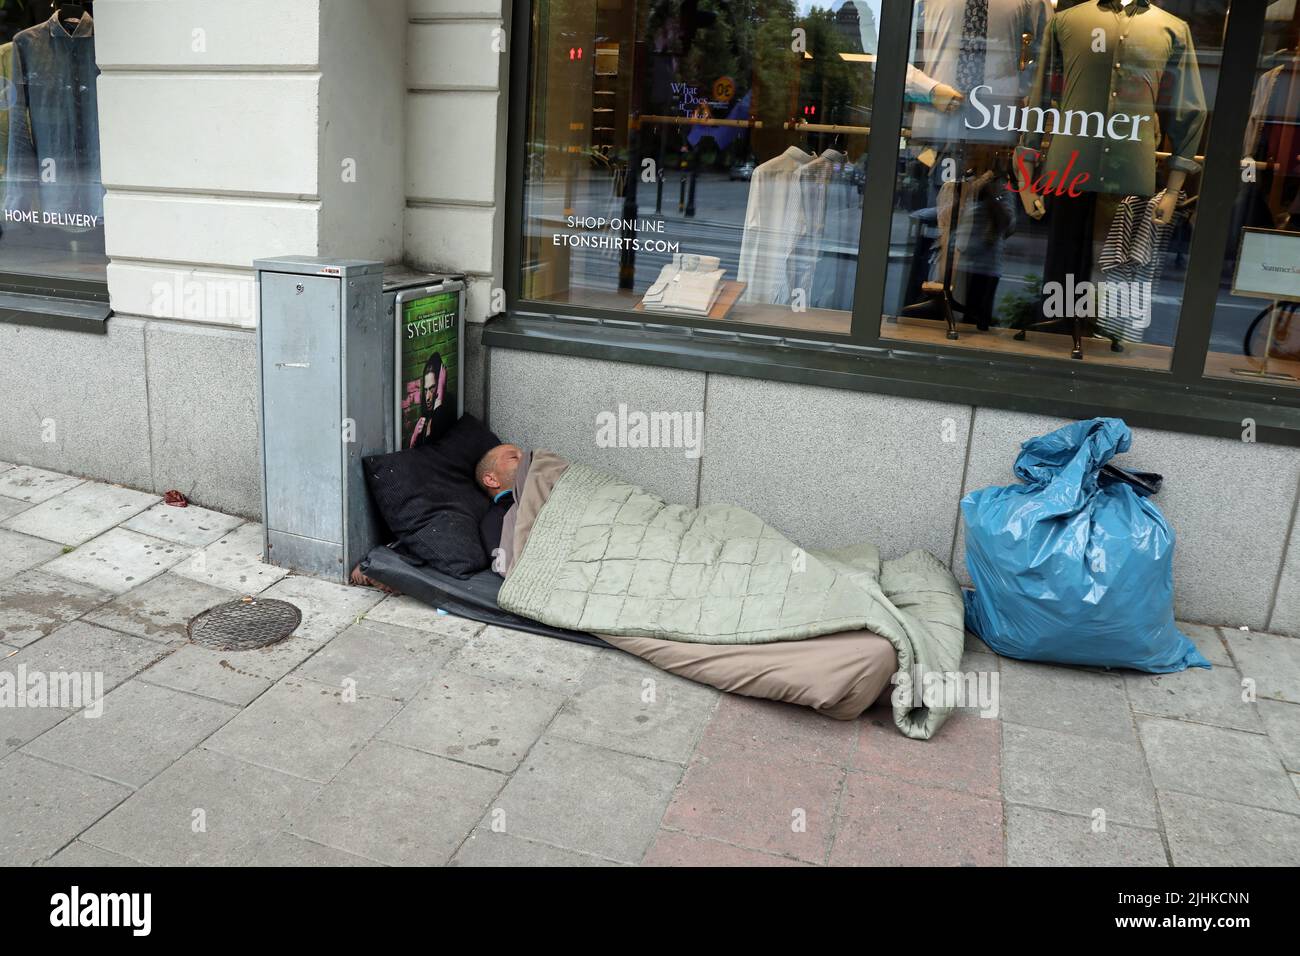 Homeless man sleeping on the street in Stockholm Stock Photo